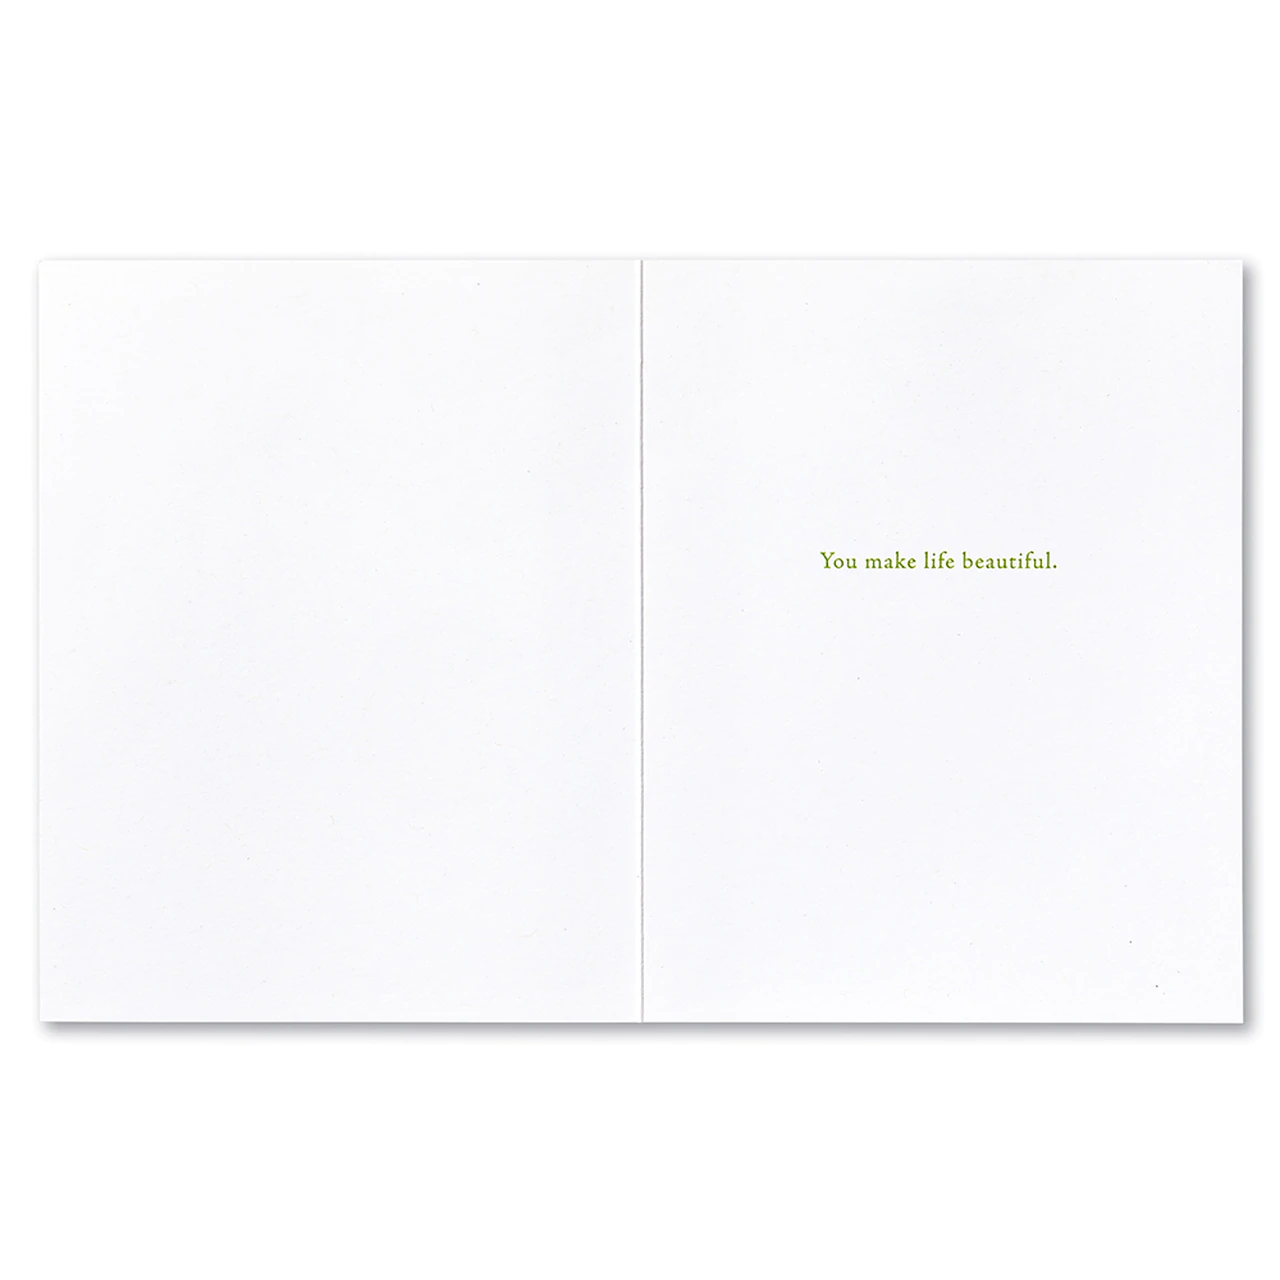 Positively Green Greeting Card - Thank You - “It’s the little things we do and say, that mean so much as we go our way.” —Willa Hoey - Mellow Monkey